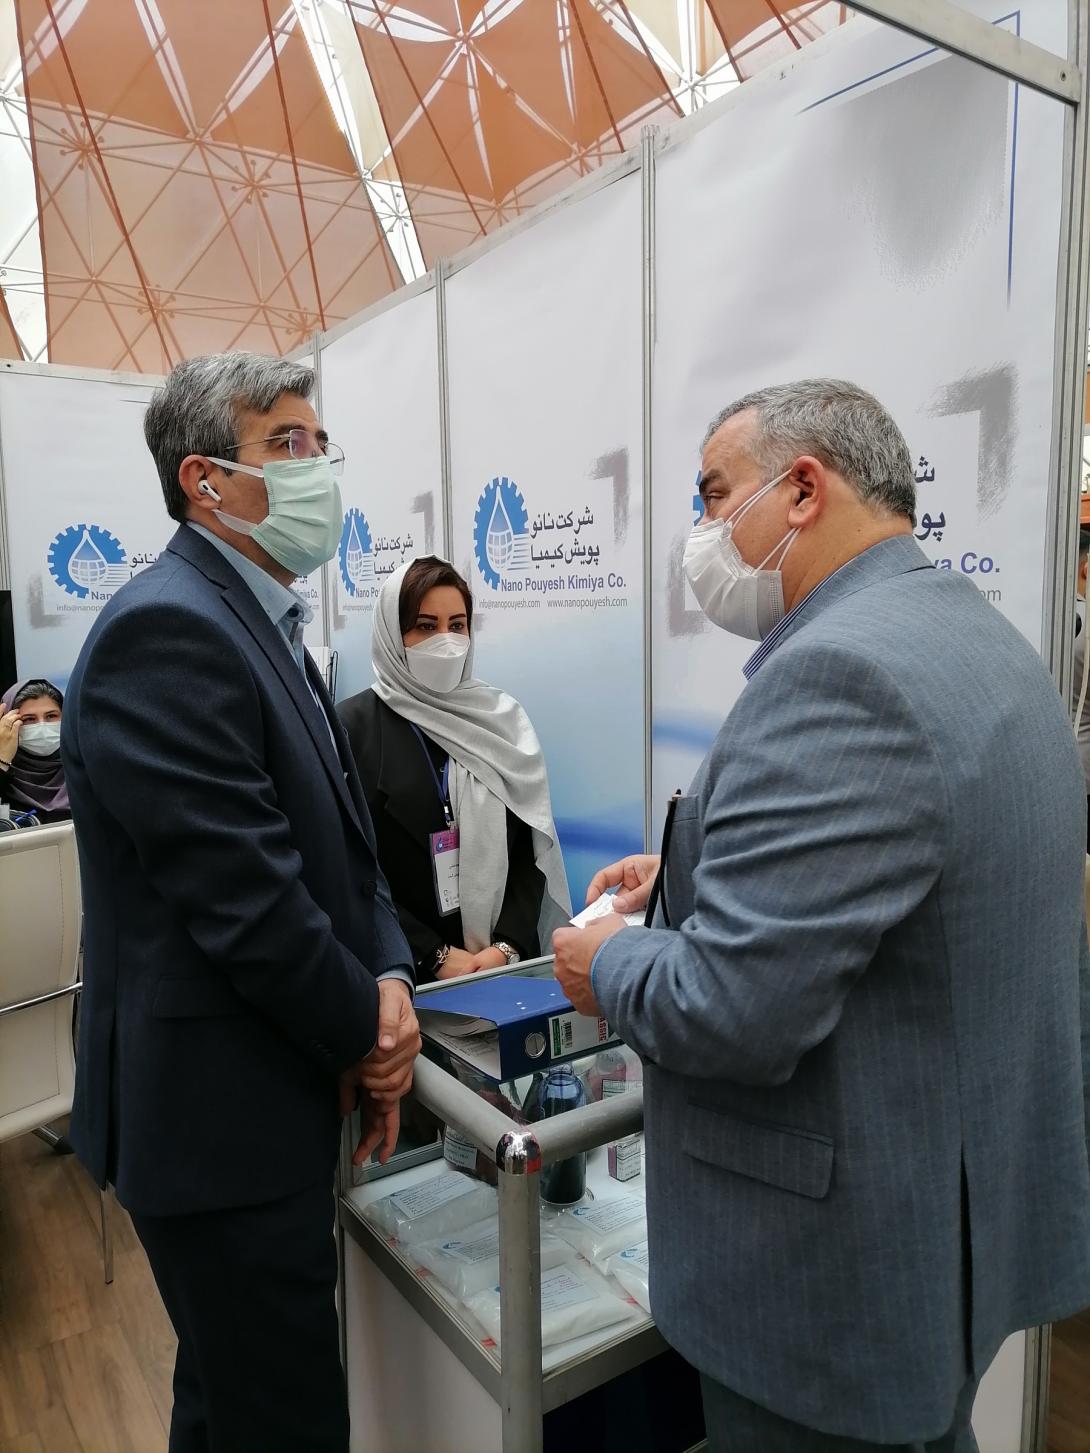 Petrochemical Research and Technology Company CEO Dr. Daftari visits Nano Pooyesh Kimia booth-Sixth International Conference and Exhibition of Masterbatch and Polymer Compounds, 15 and 16 January 2022, Tehran, Olympic Hotel